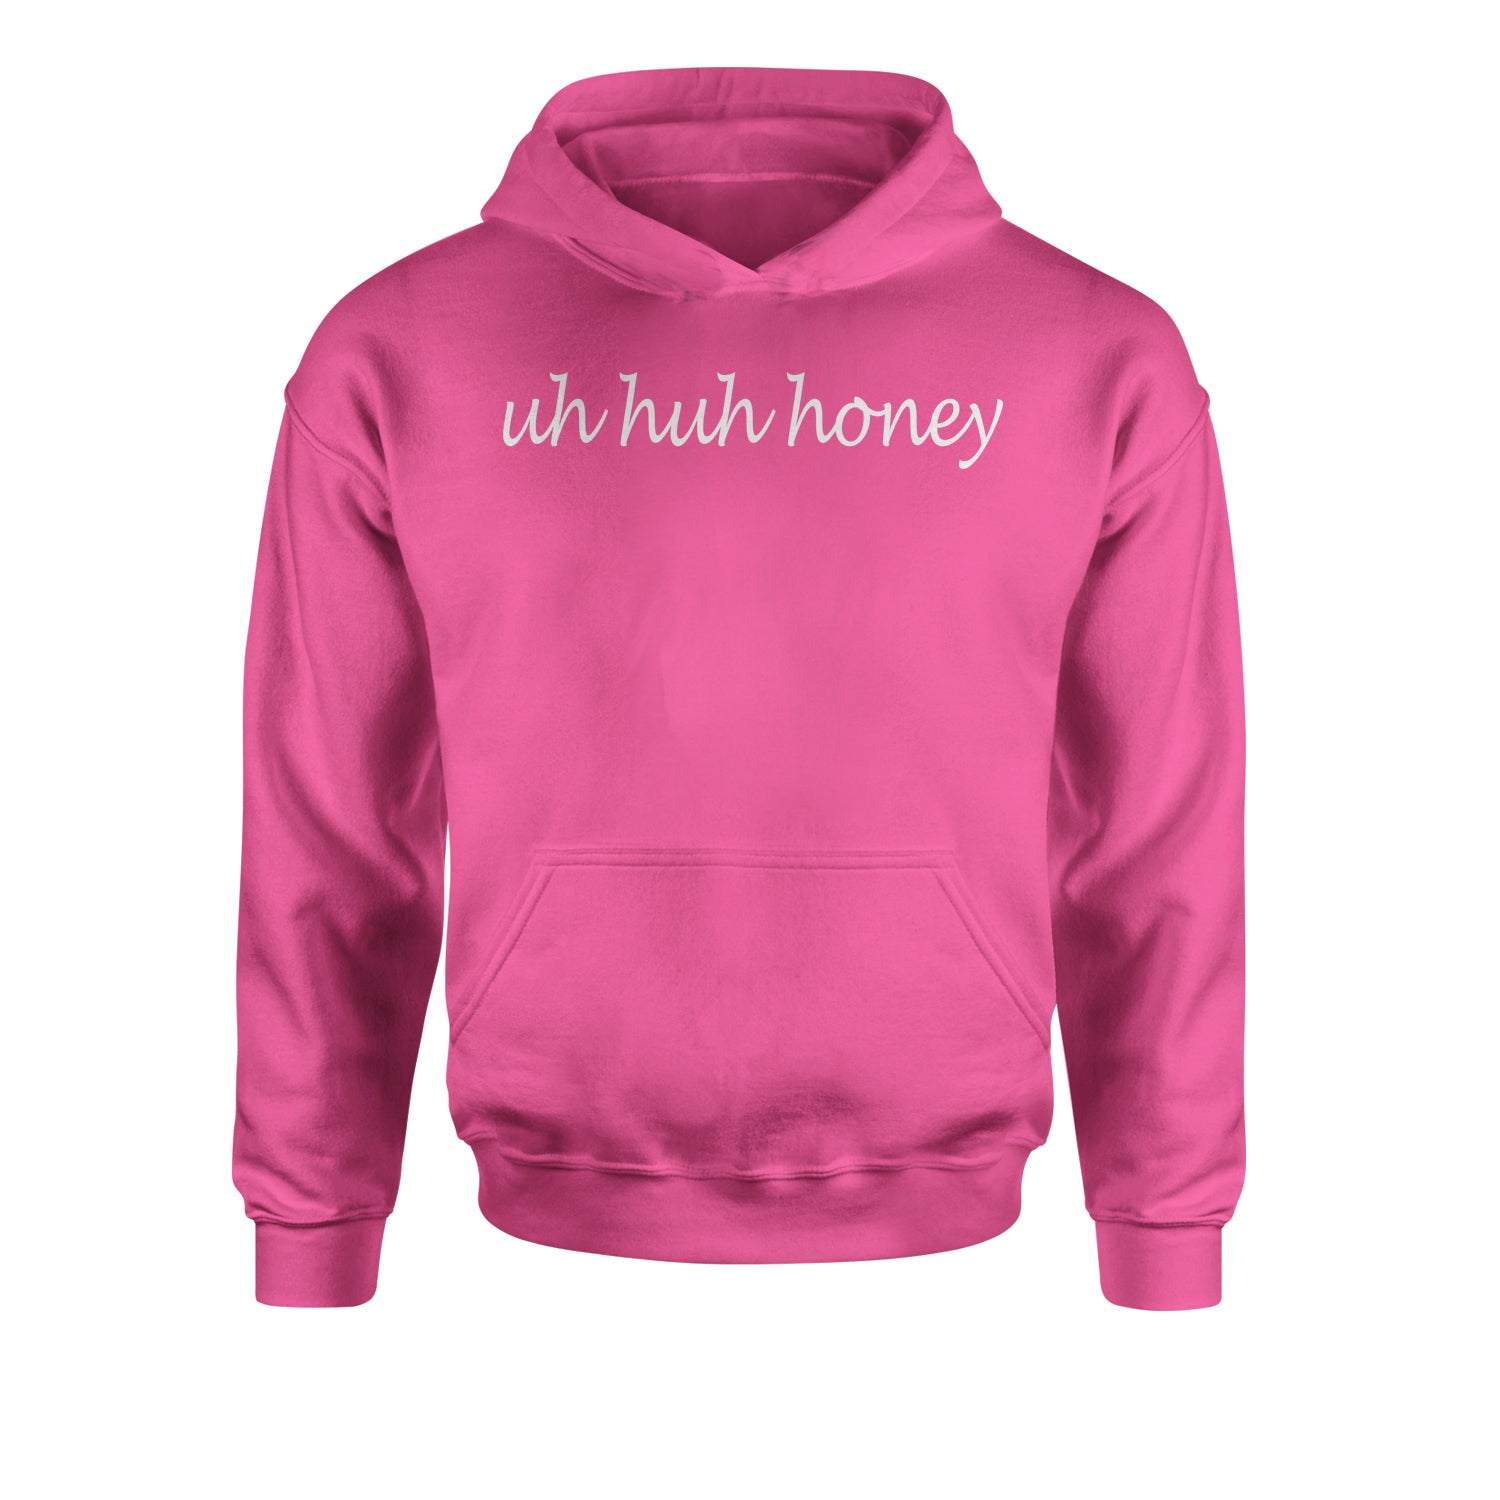 Uh Huh Honey Youth-Sized Hoodie uhhuh, uhuh, unhunh by Expression Tees